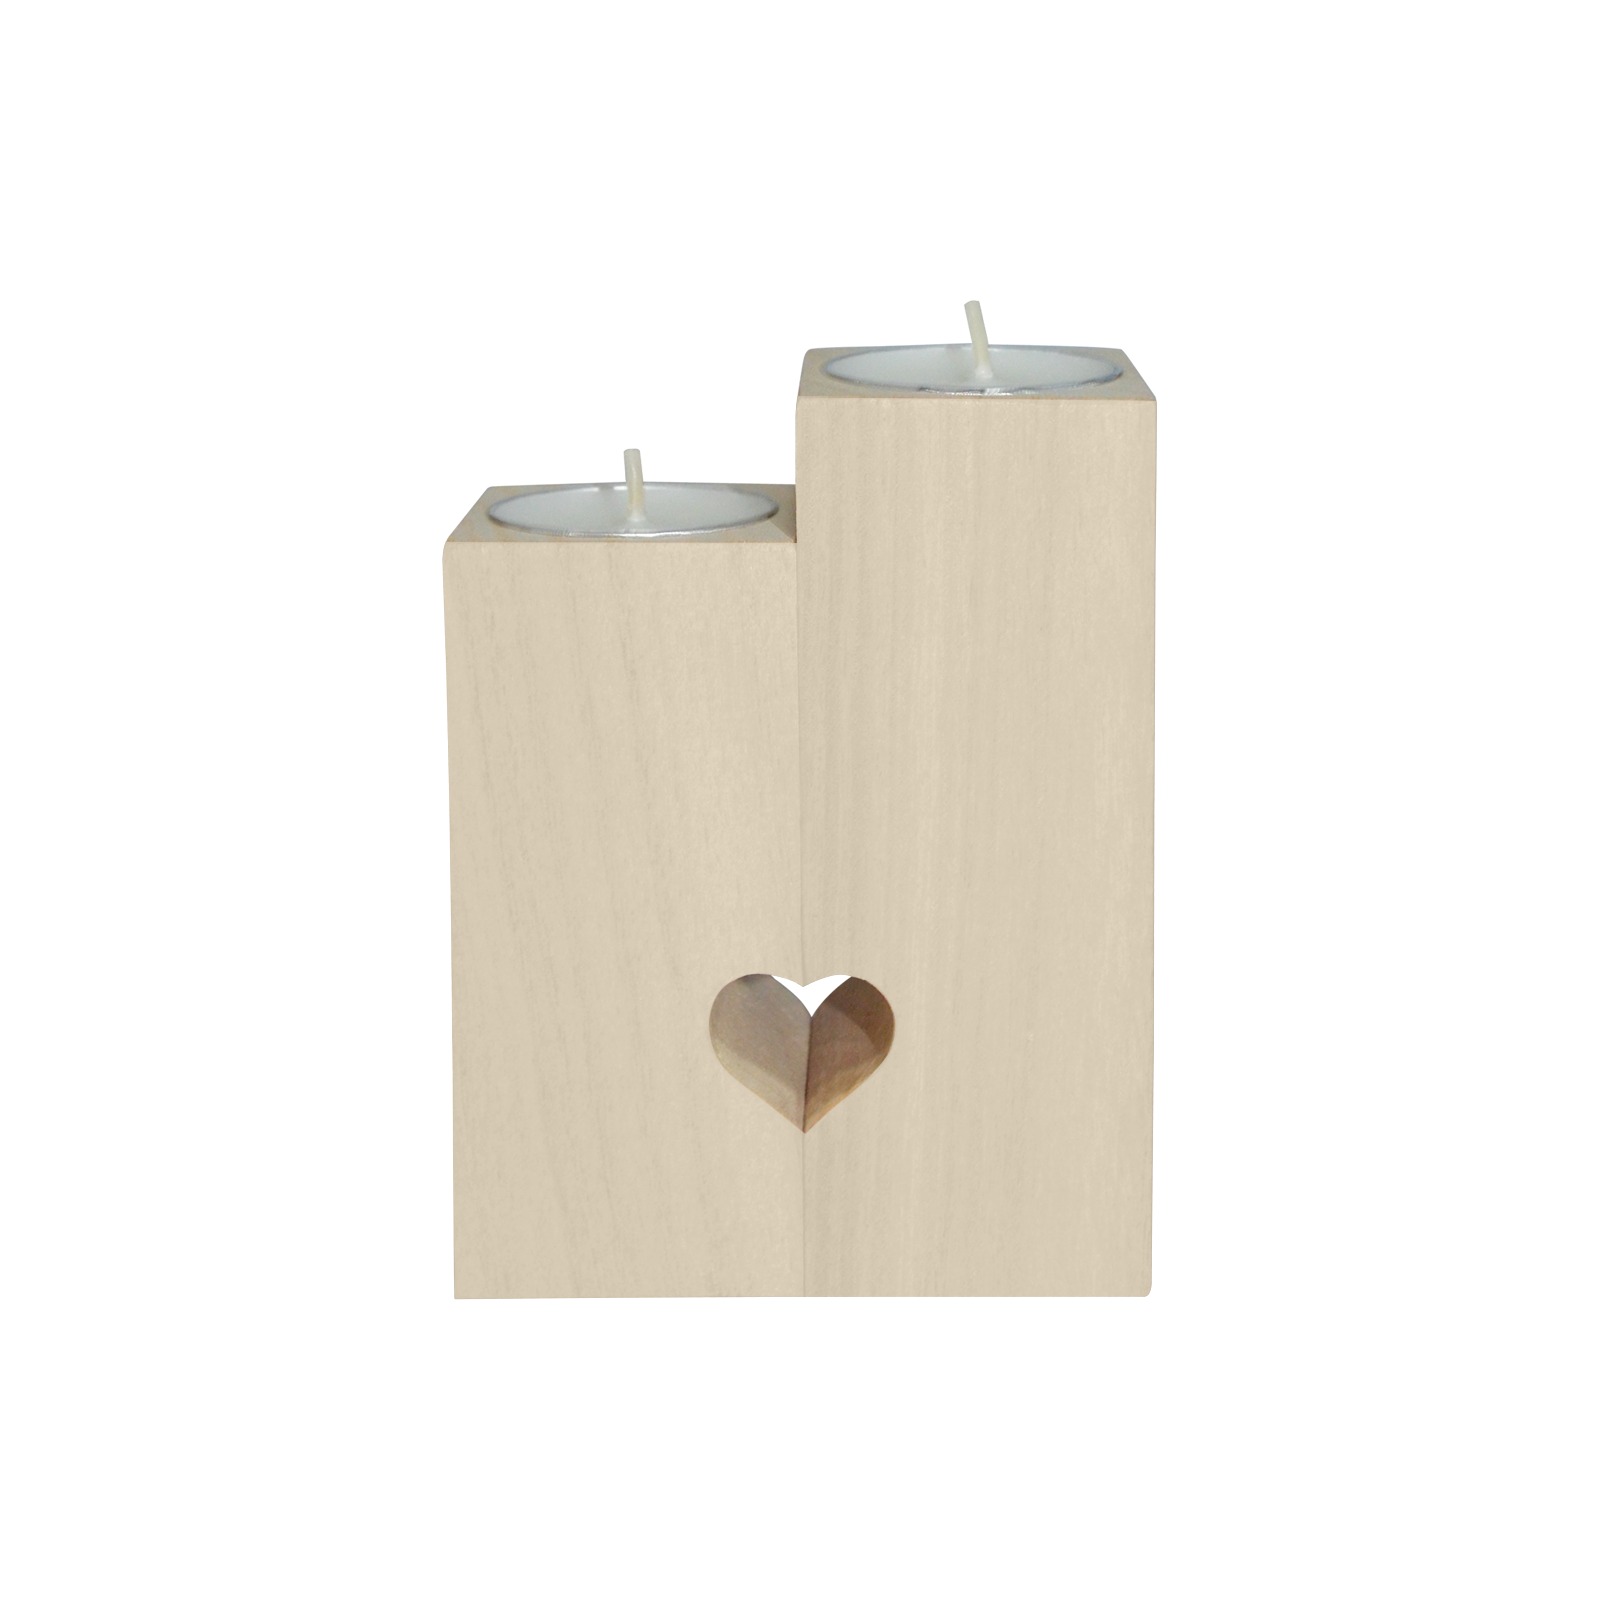 New York by Nico Bielow Wooden Candle Holder (Without Candle)